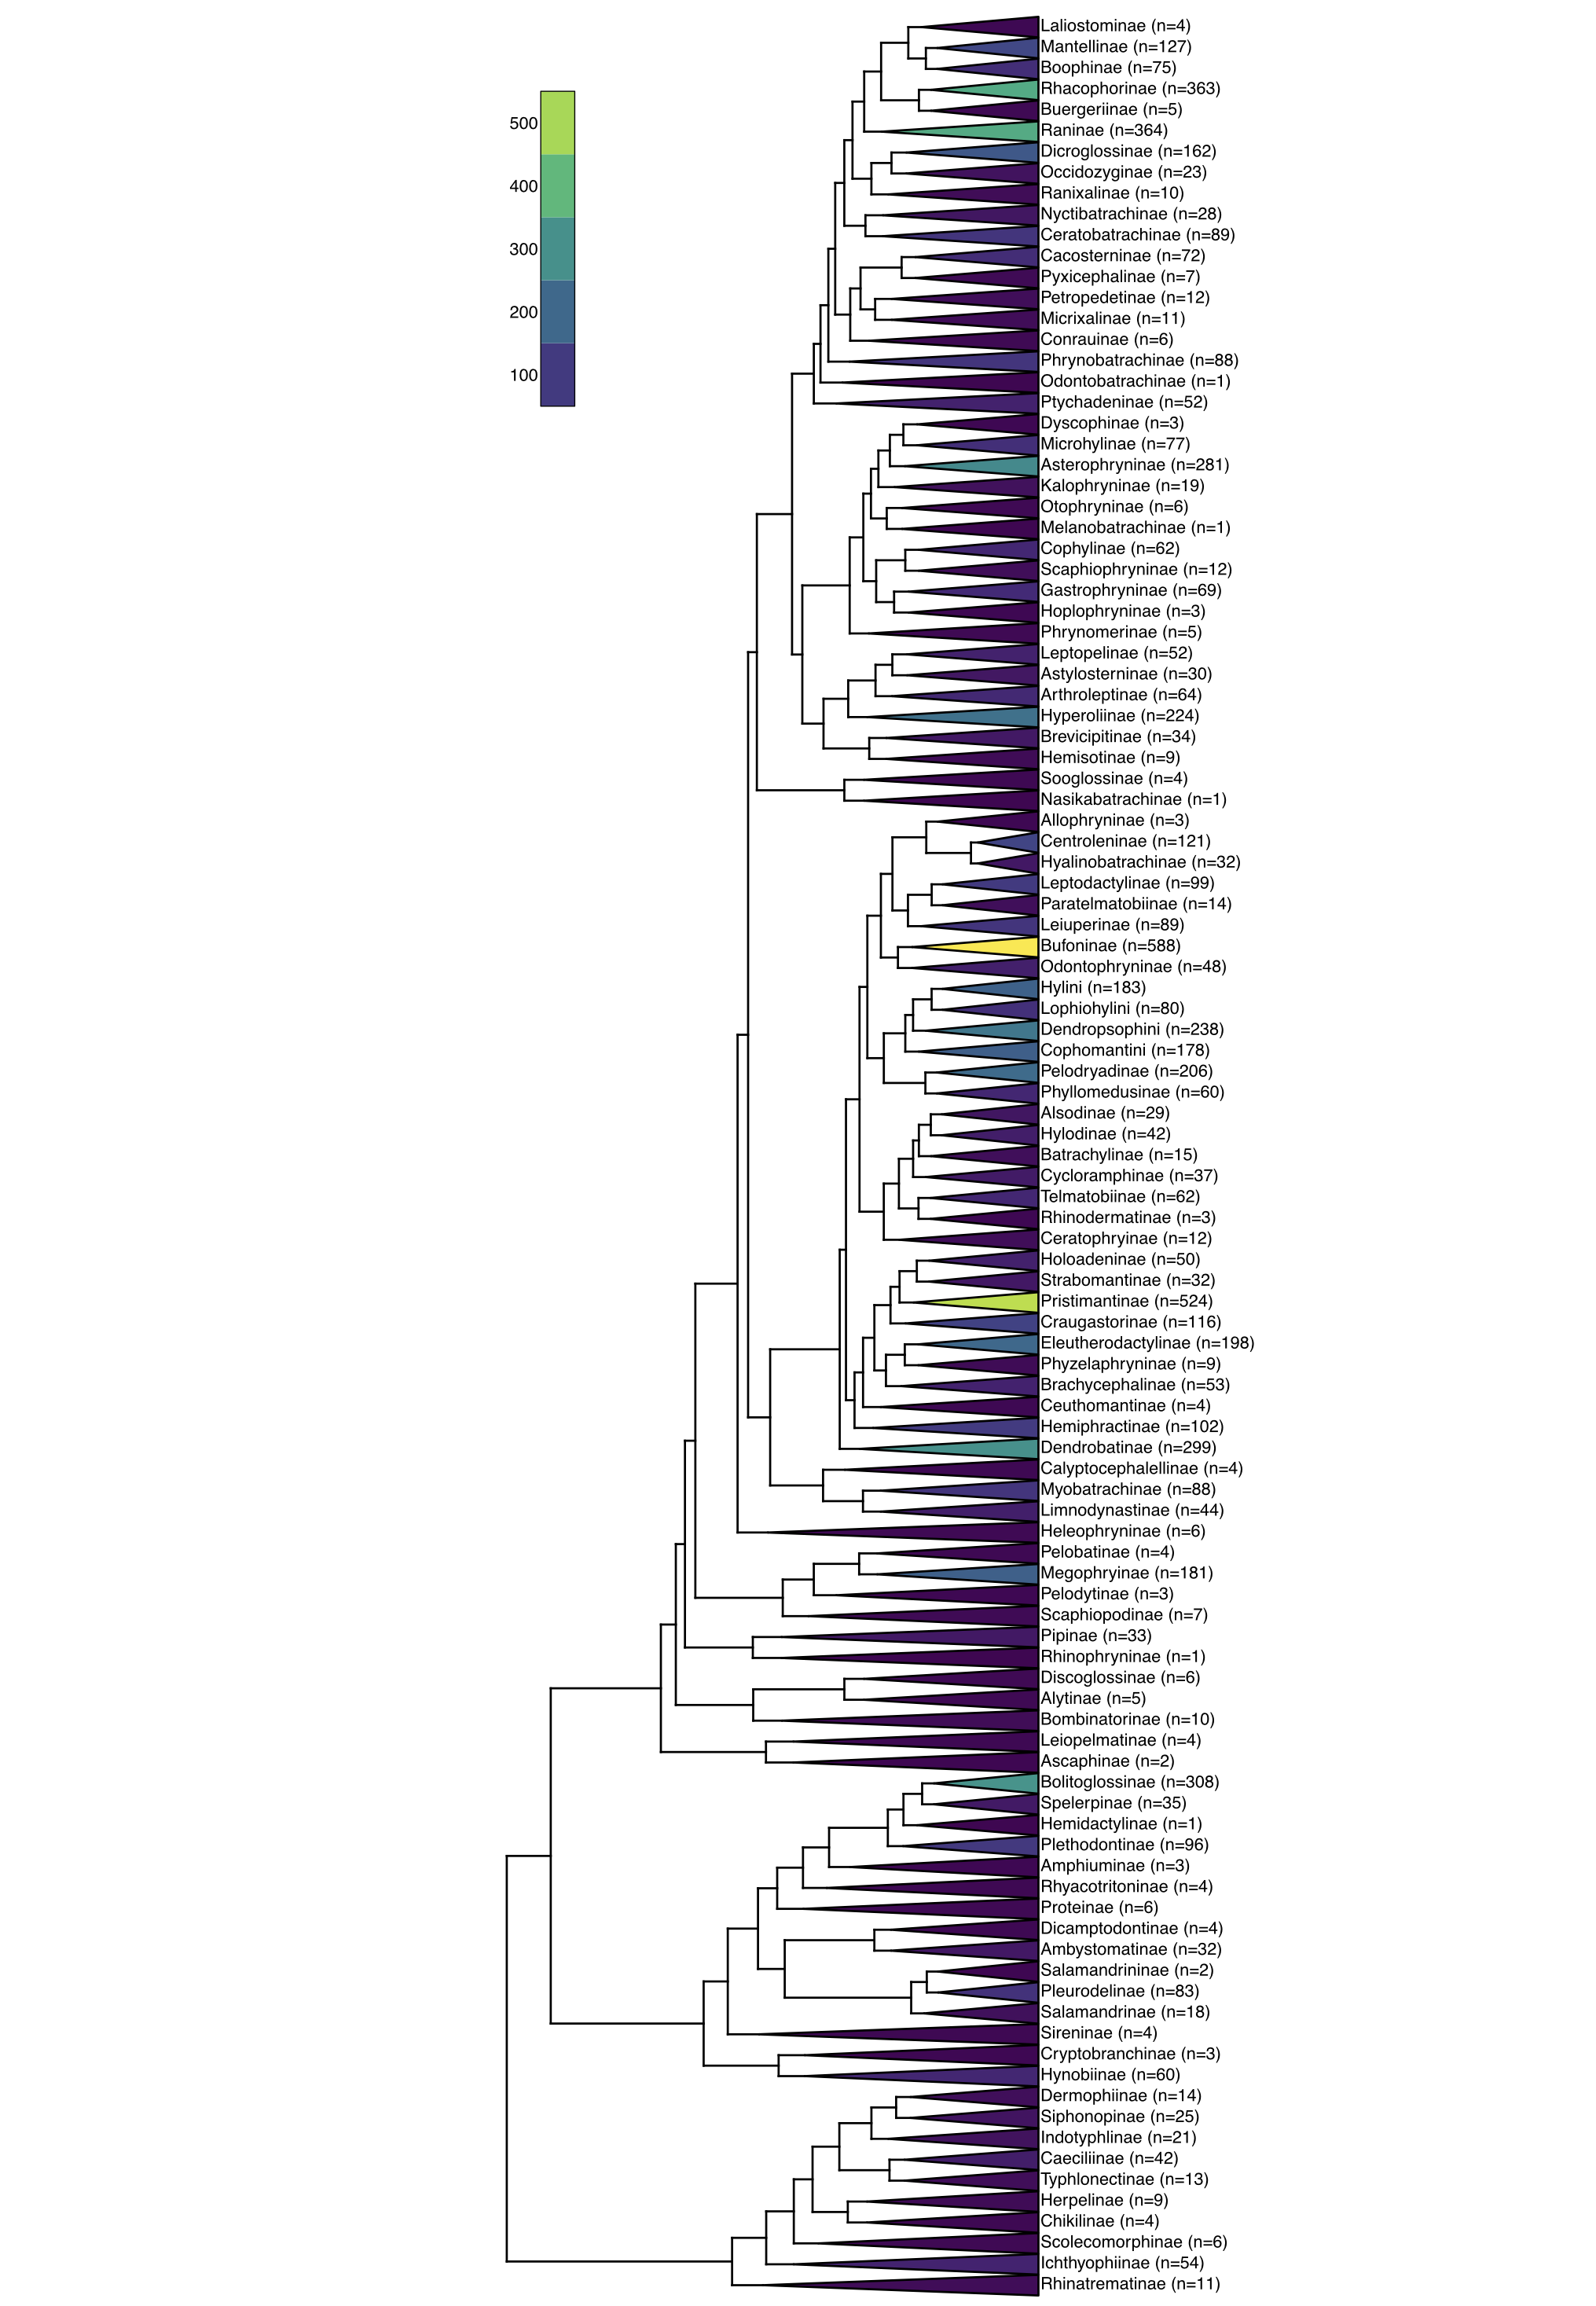 Figure 12.3. Phylogenetic tree of amphibians with divergence times and diversities of major clades. Data from Jetz and Pyron (Jetz and Pyron 2018). Image by the author, can be reused under a CC-BY-4.0 license.